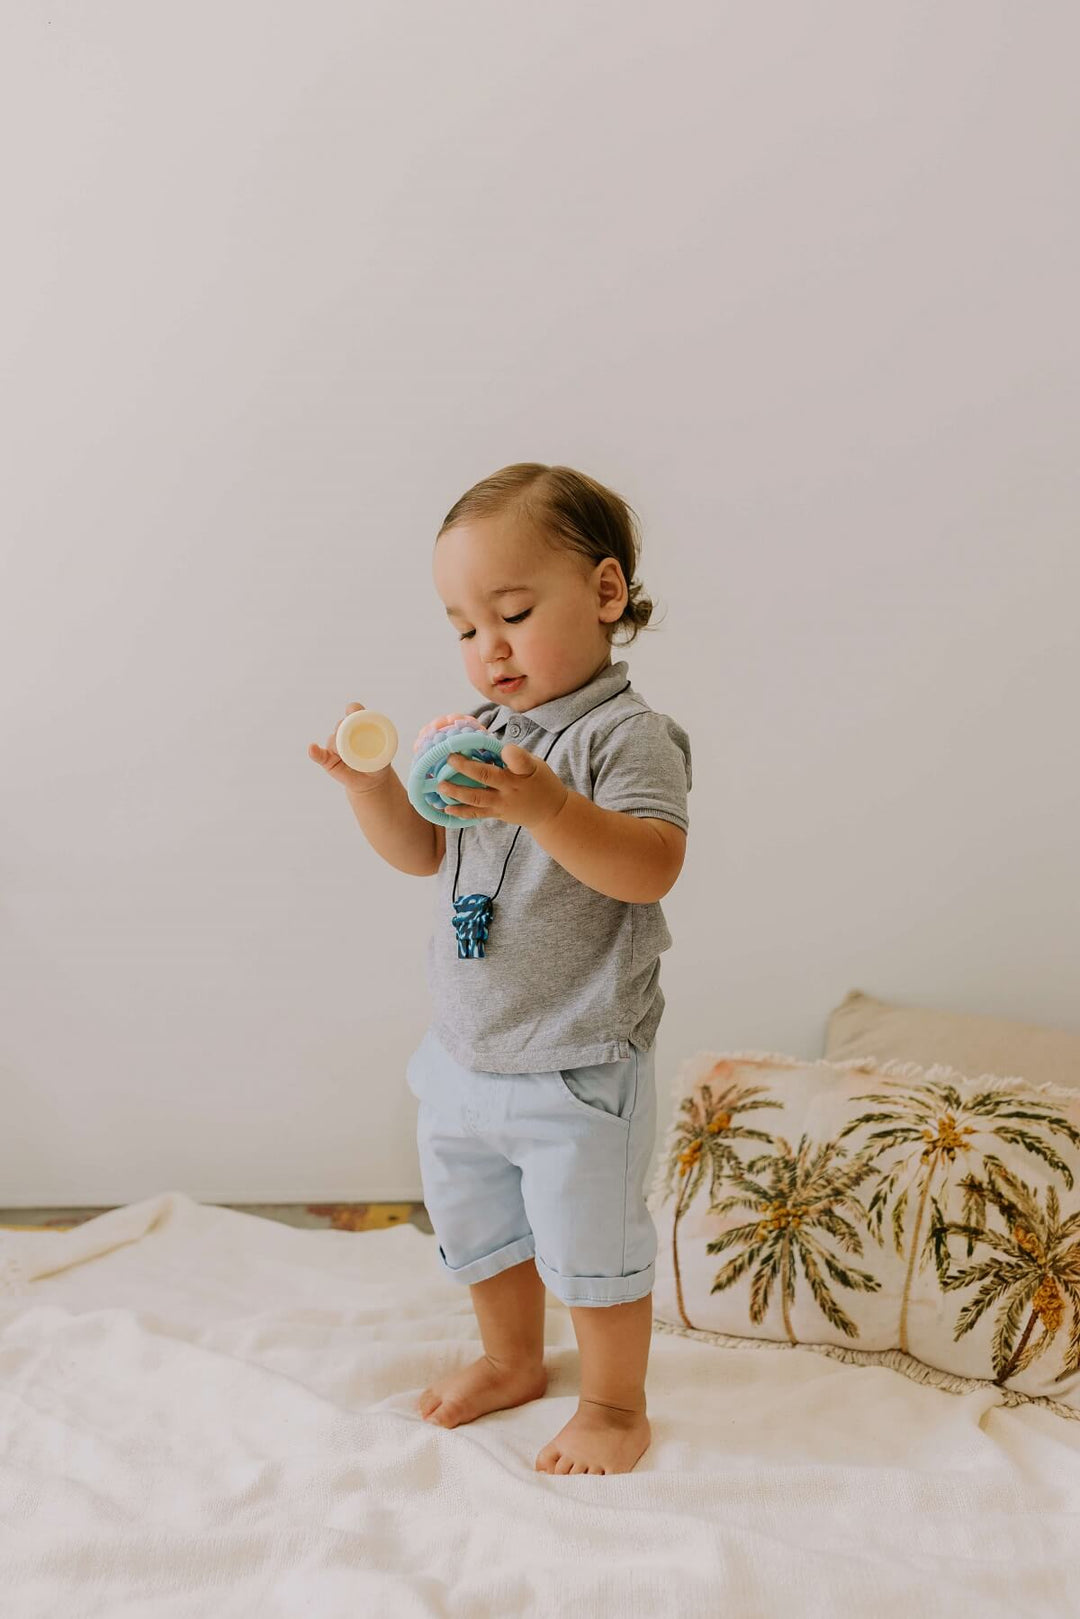 Choosing Safe and Non-Toxic Teething Toys for Babies